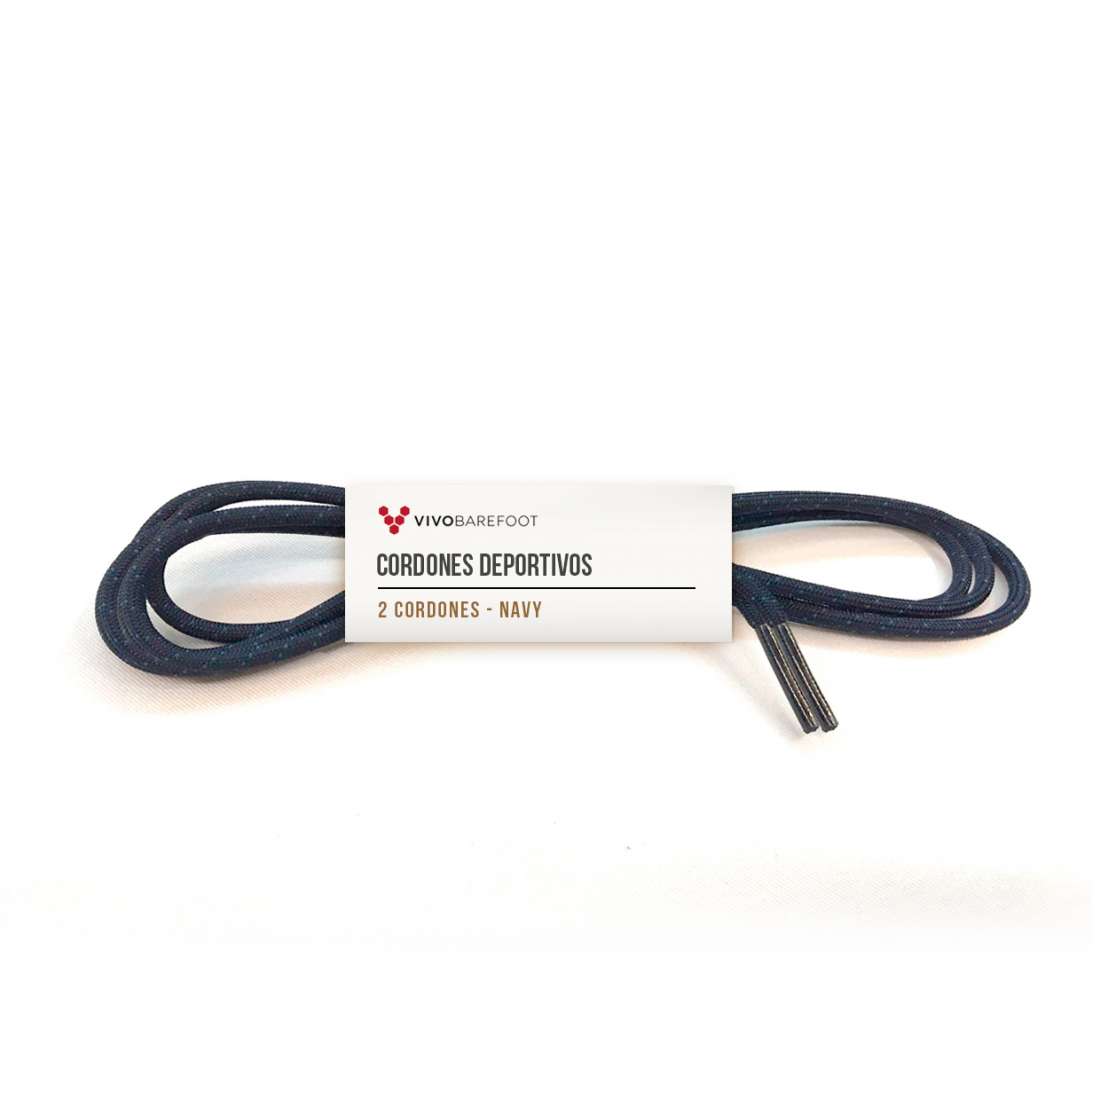 Vivobarefoot Sports Shoelaces for all 